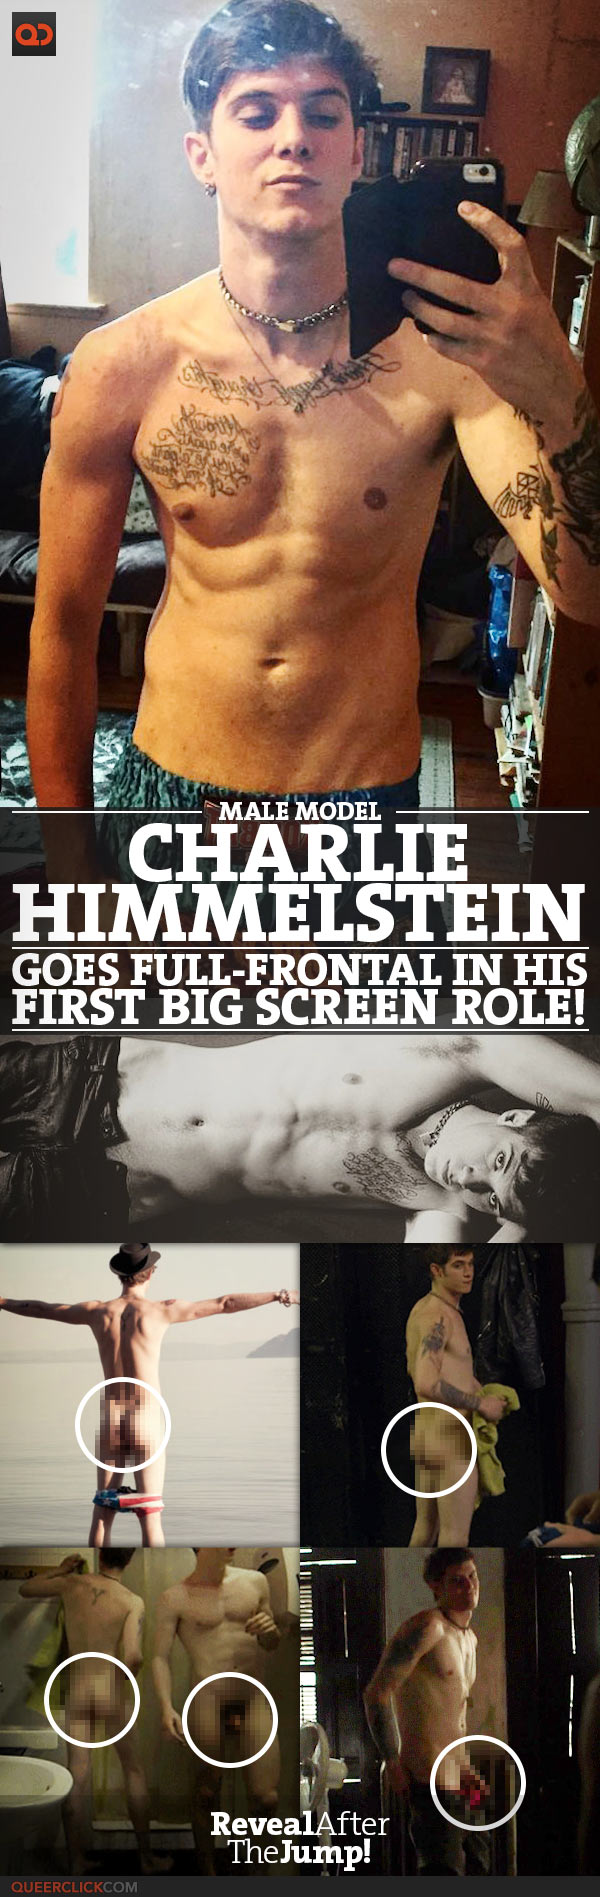 Male Model Charlie Himmelstein Goes Full-frontal In His First Big Screen Role!